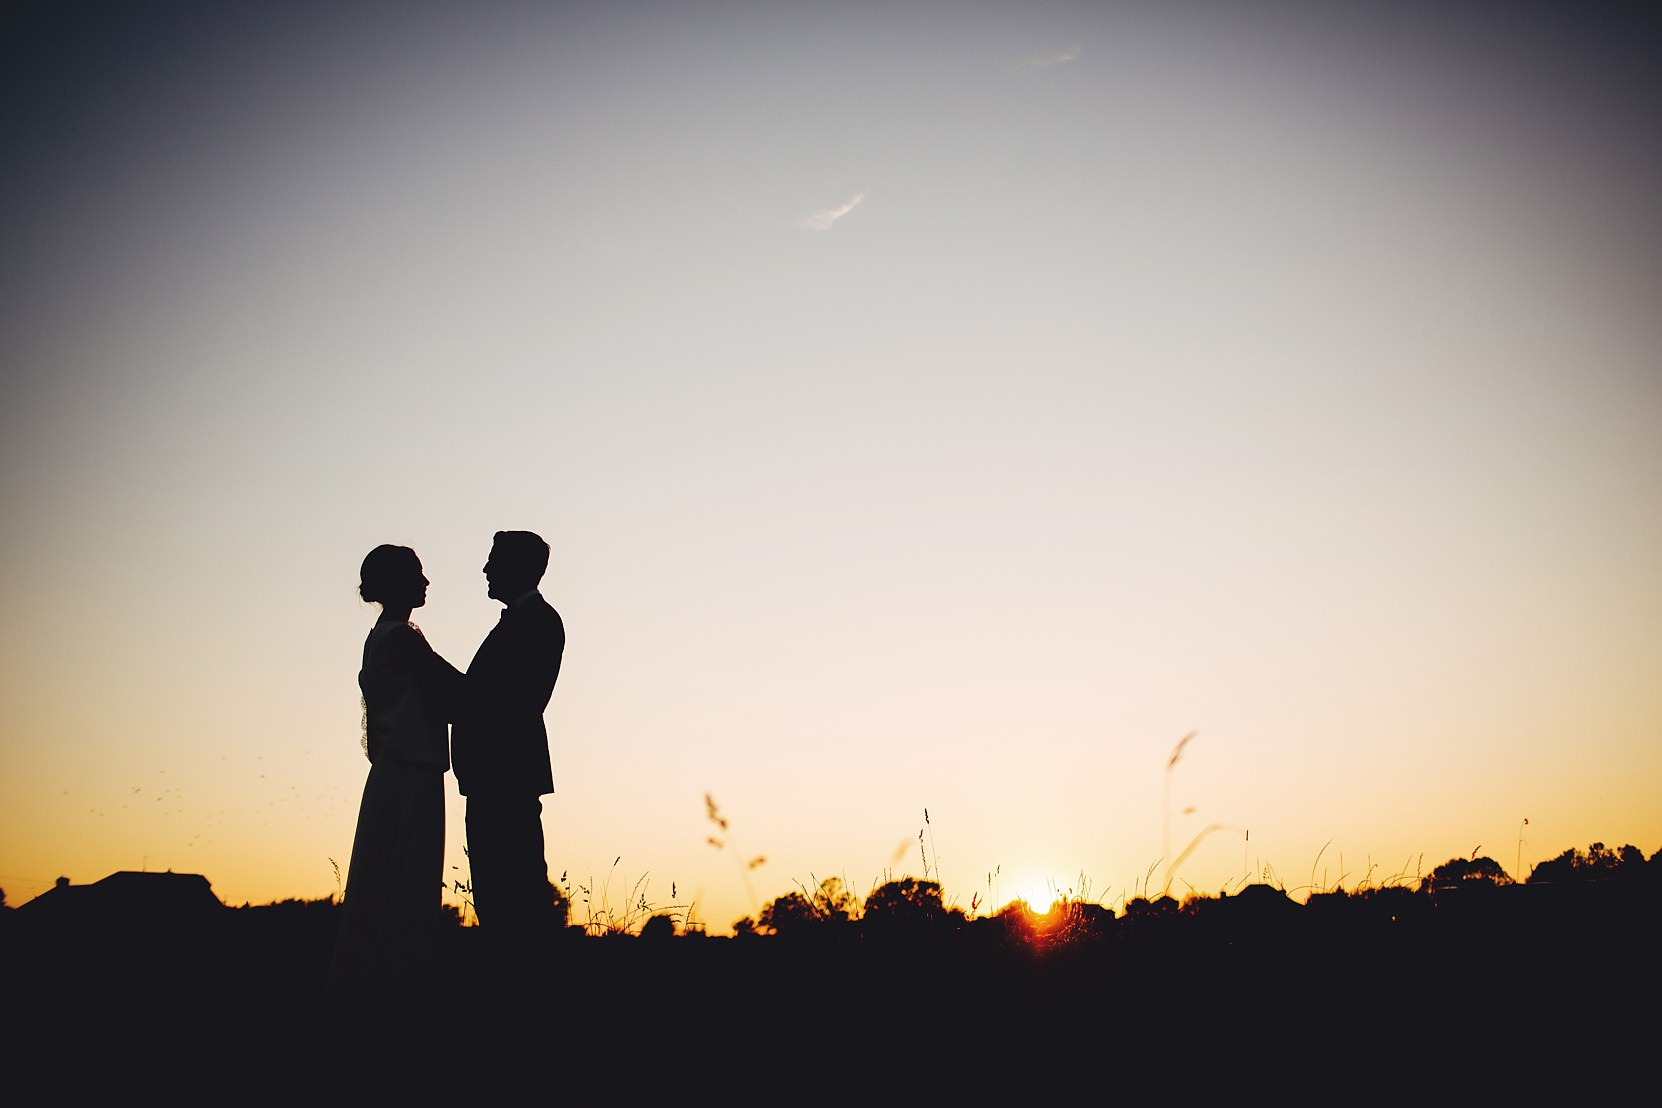 Romantic shot of a bride and groom in a beautiful setting at sunset